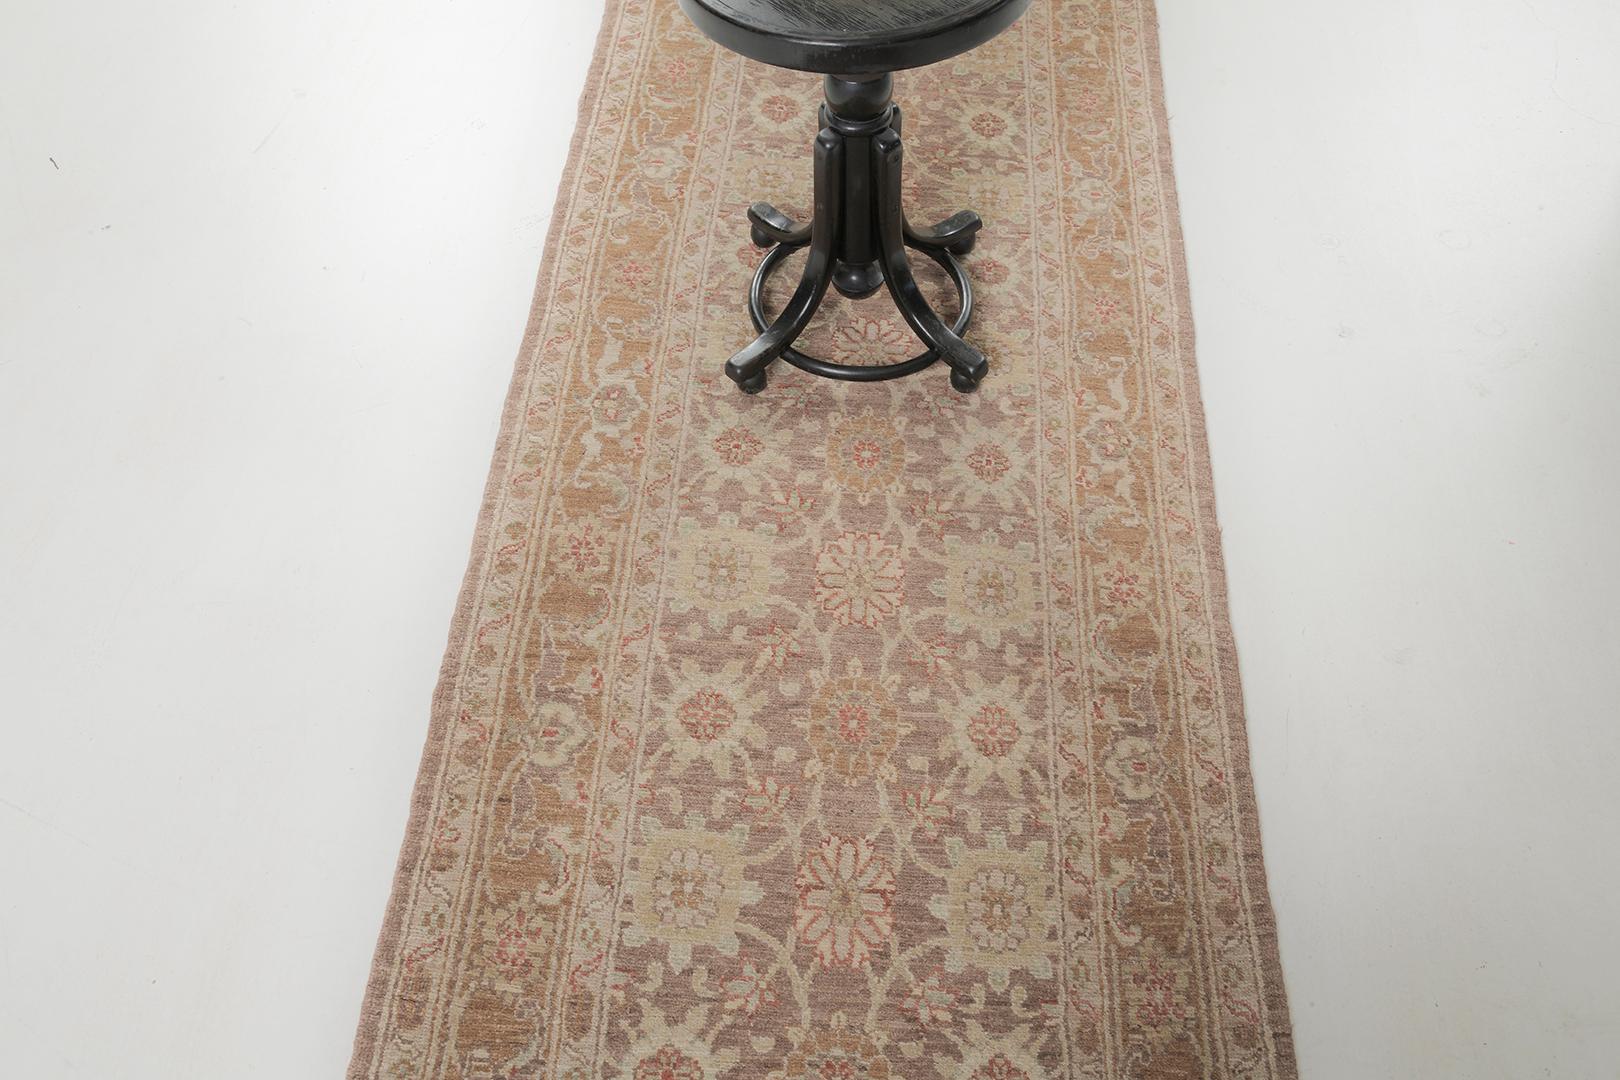 Mehraban Natural Dye Sultanabad Design Runner Divine In New Condition For Sale In WEST HOLLYWOOD, CA